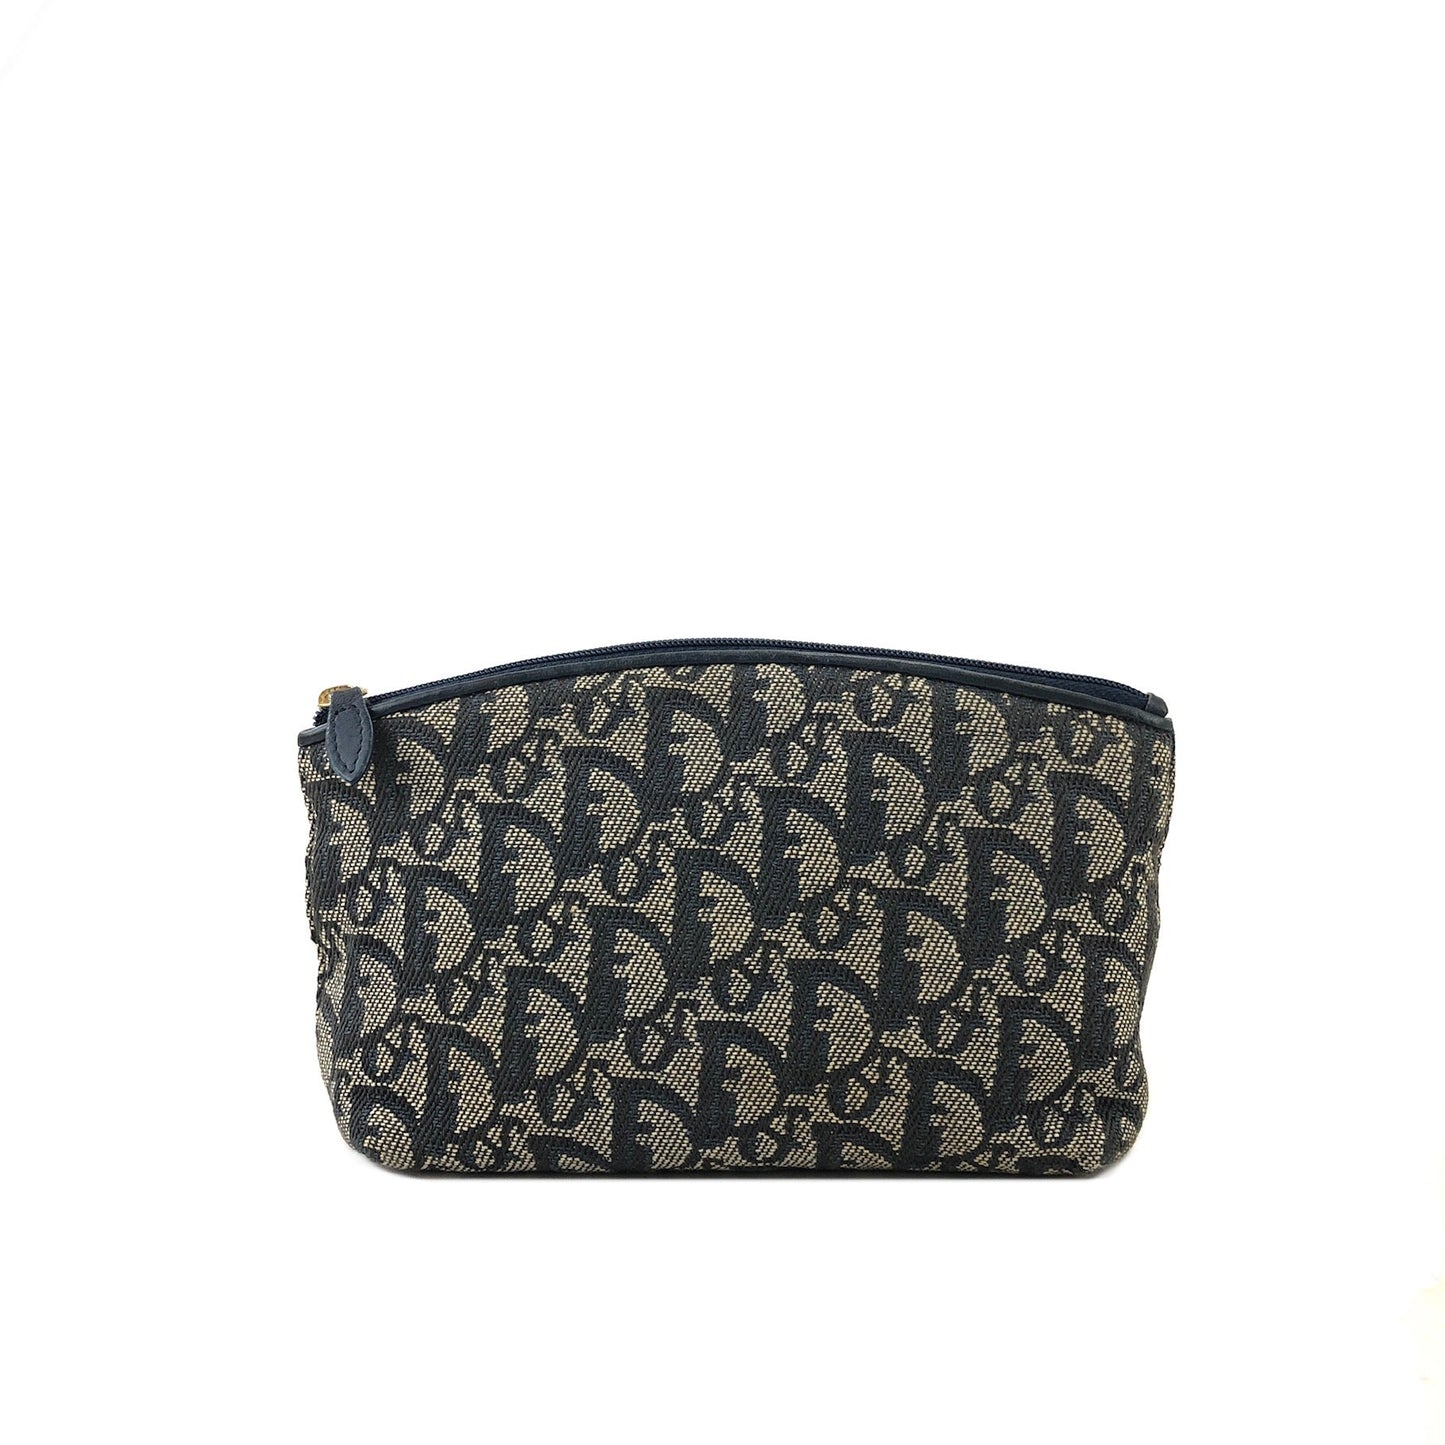 Christian Dior Trotter Jacquard Pouch Navy Vintage Old mz8vzi